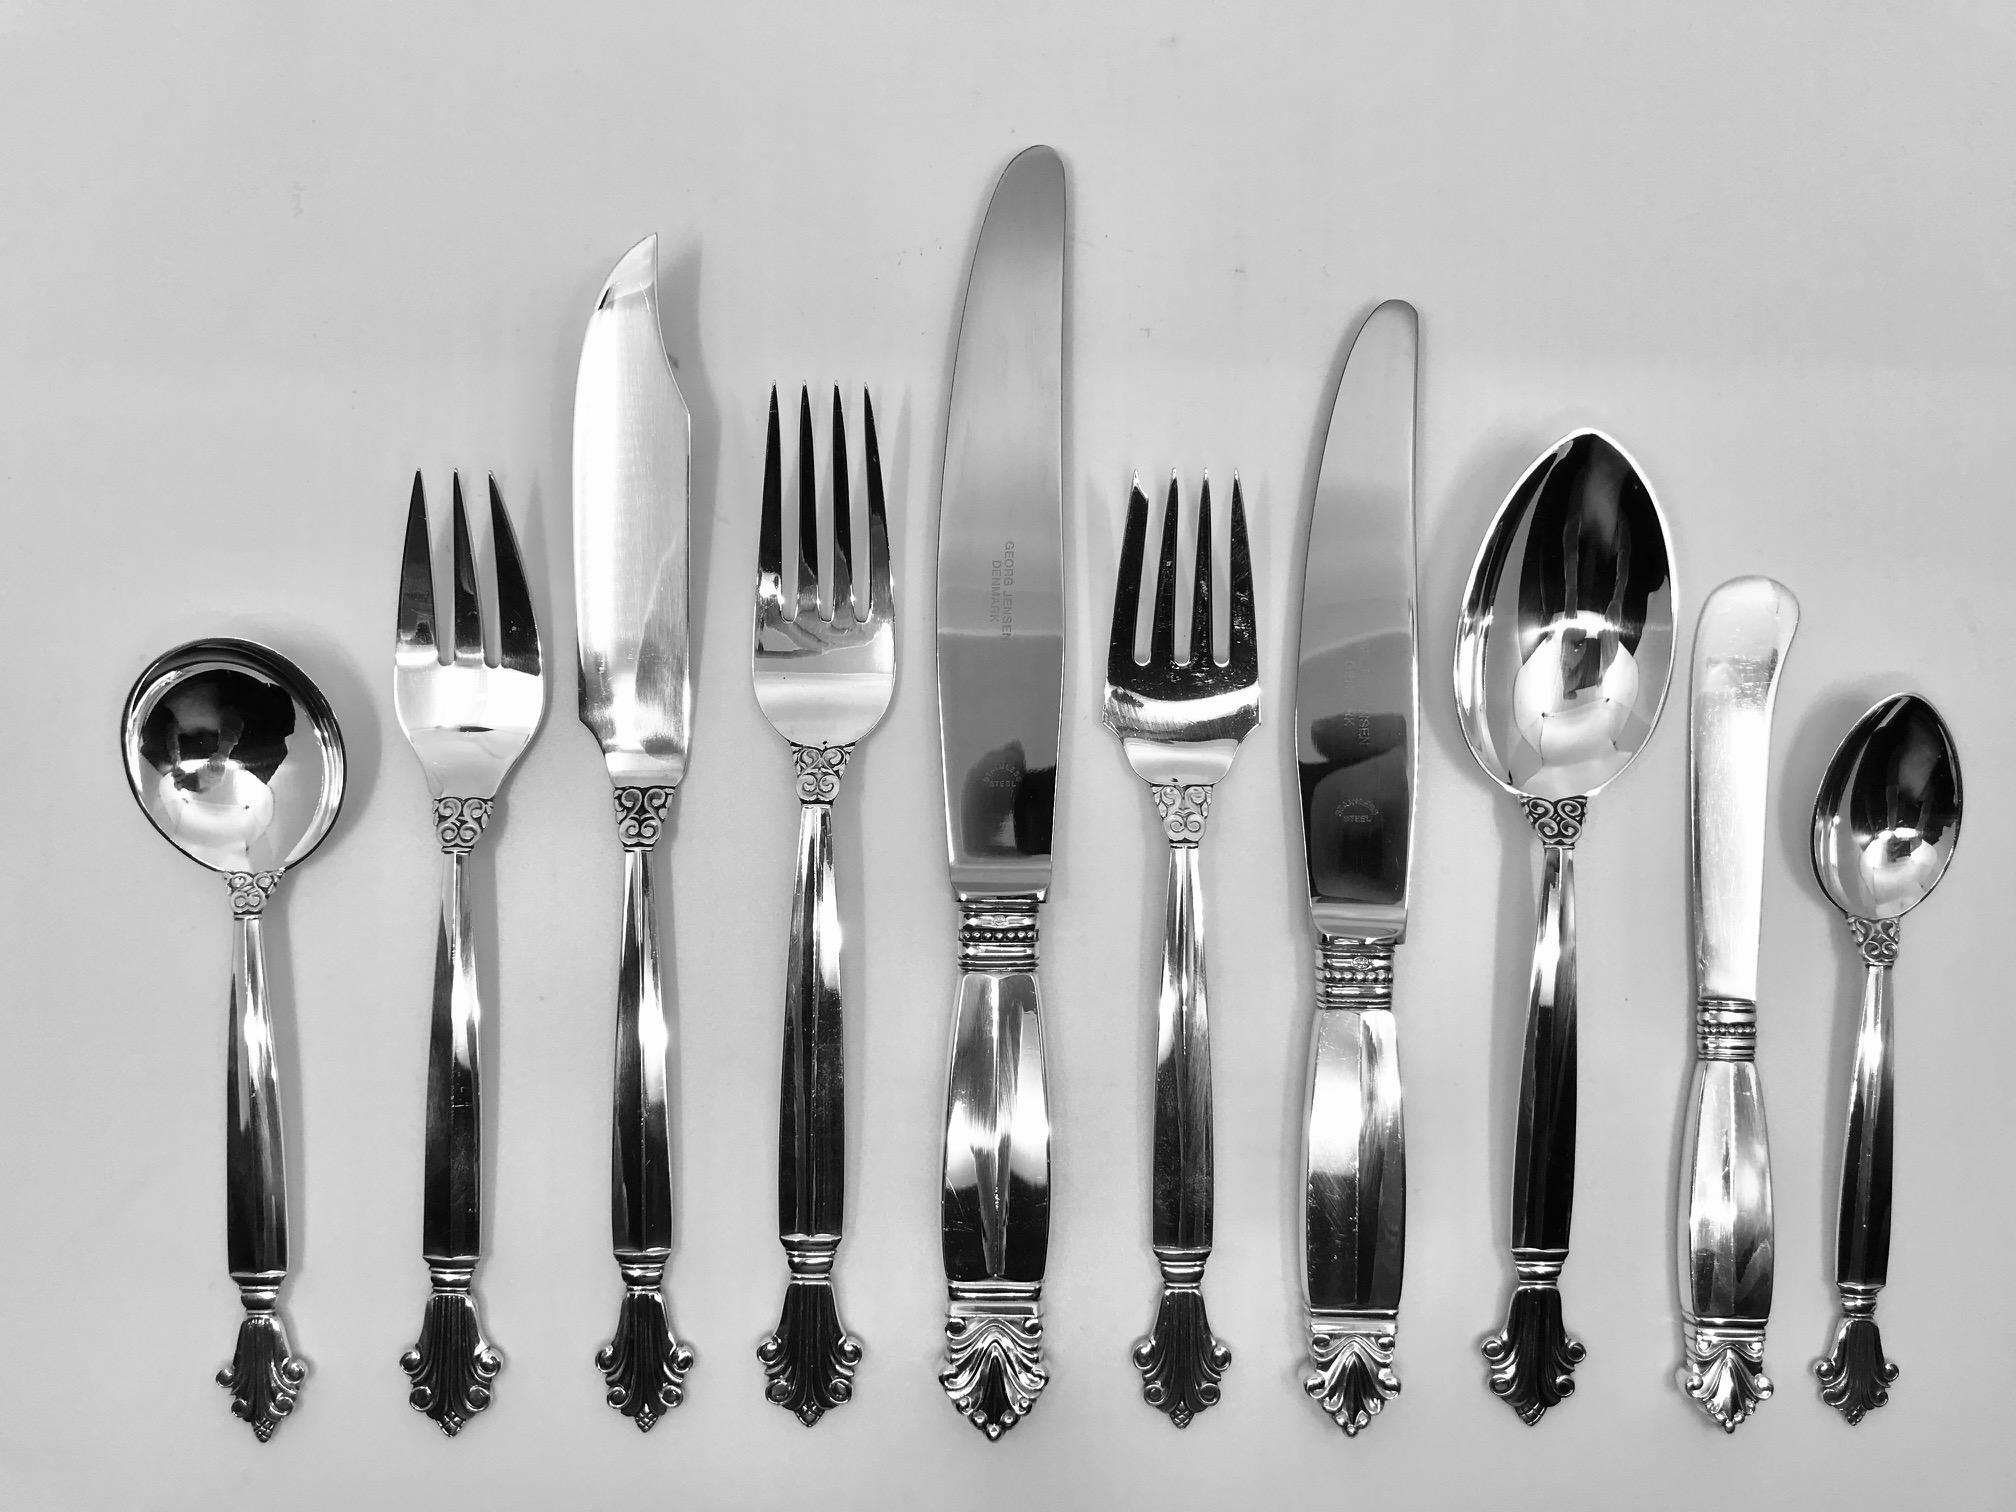 191 pieces of Georg Jensen sterling silverware in the Acanthus pattern, design by Johan Rohde from 1917. This is the sister pattern to Johan Rohde's famous Acorn silverware; the original Danish name of Acorn is 